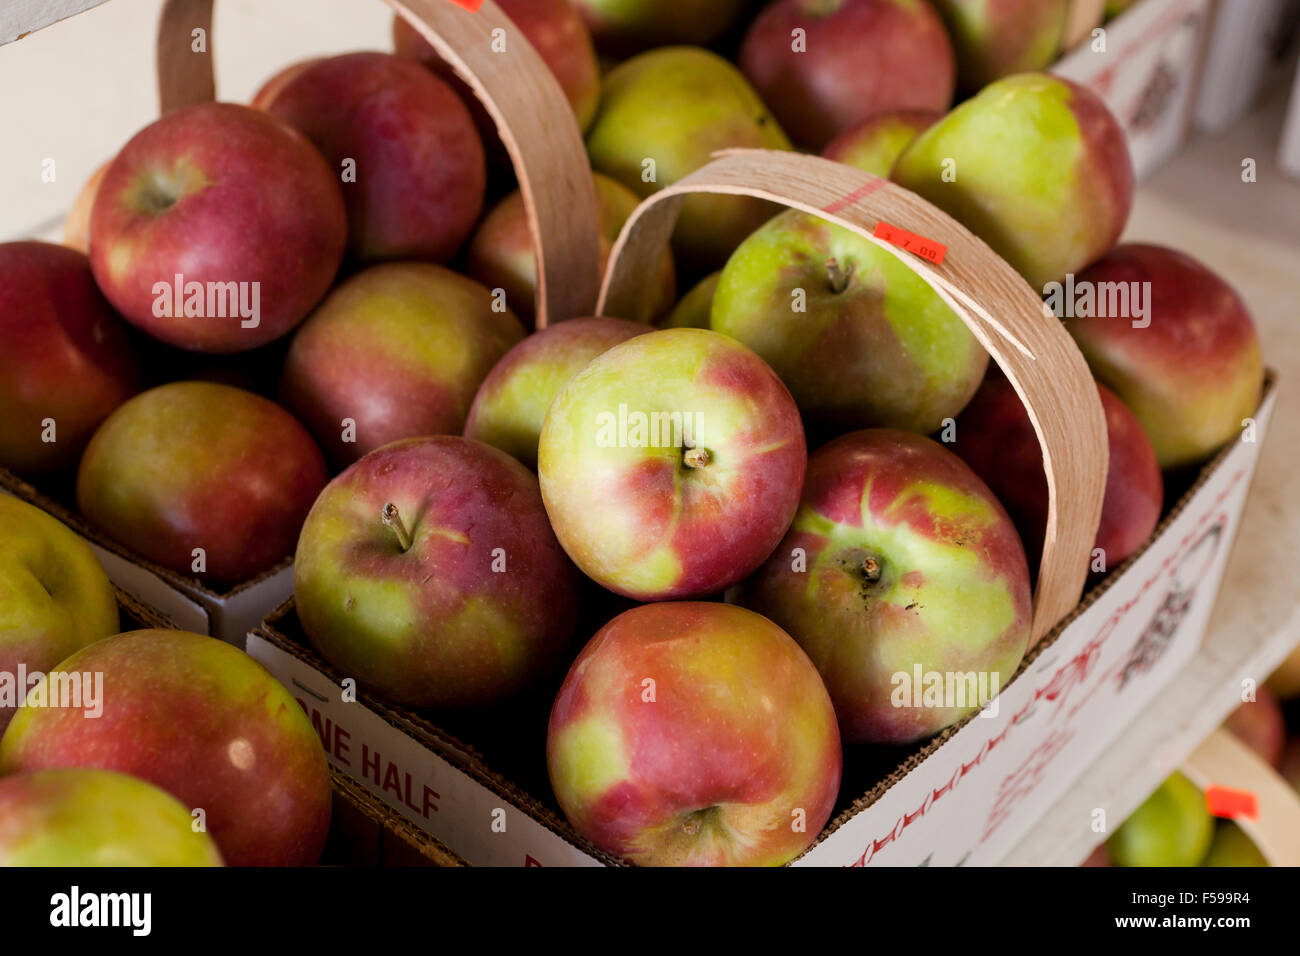 Raw Organic Red Mcintosh Apples Stock Photo - Download Image Now